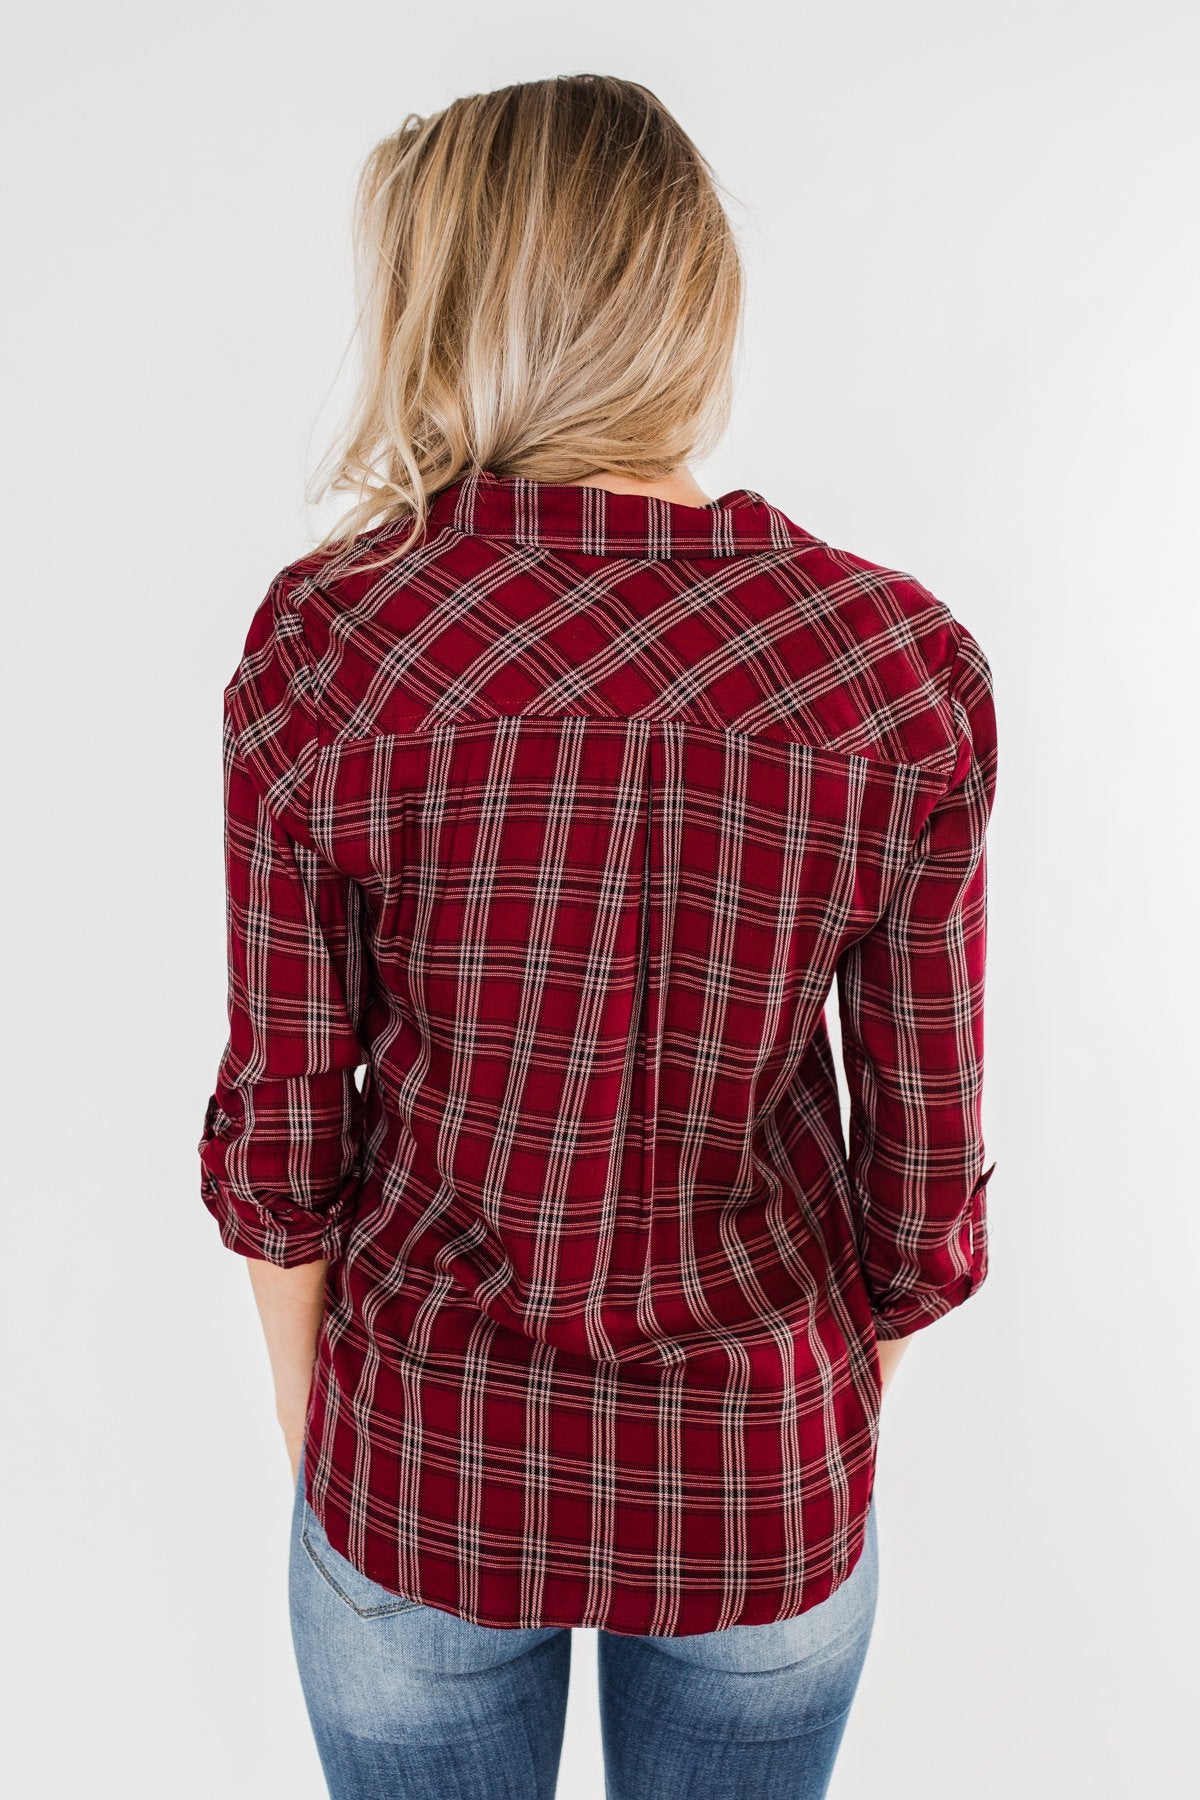 Ready For The Season Plaid Top- Cranberry